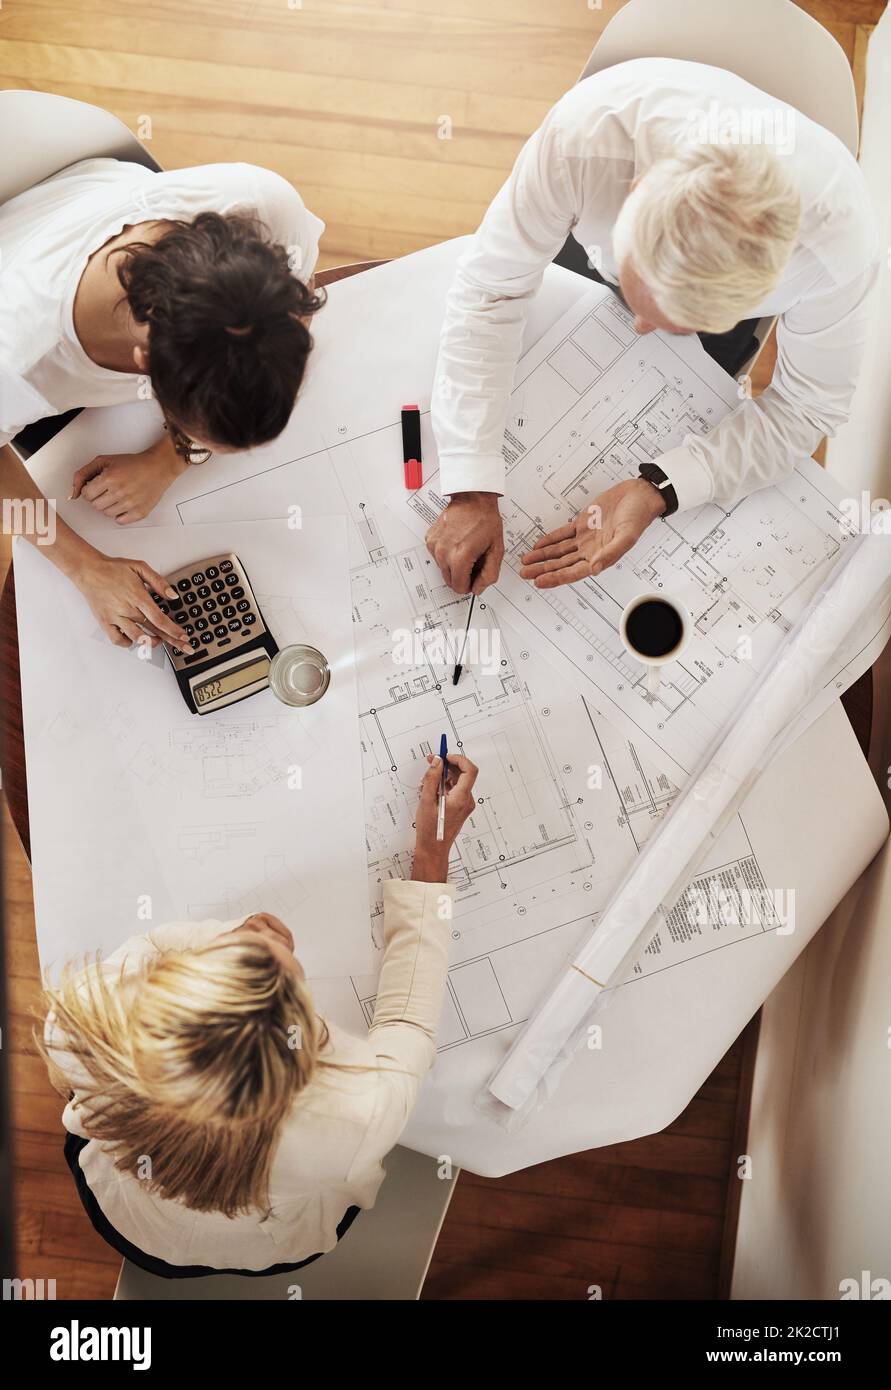 Planning out their next step. High angle shot of a group of architects working together on blueprints of a house around a table inside of a building. Stock Photo